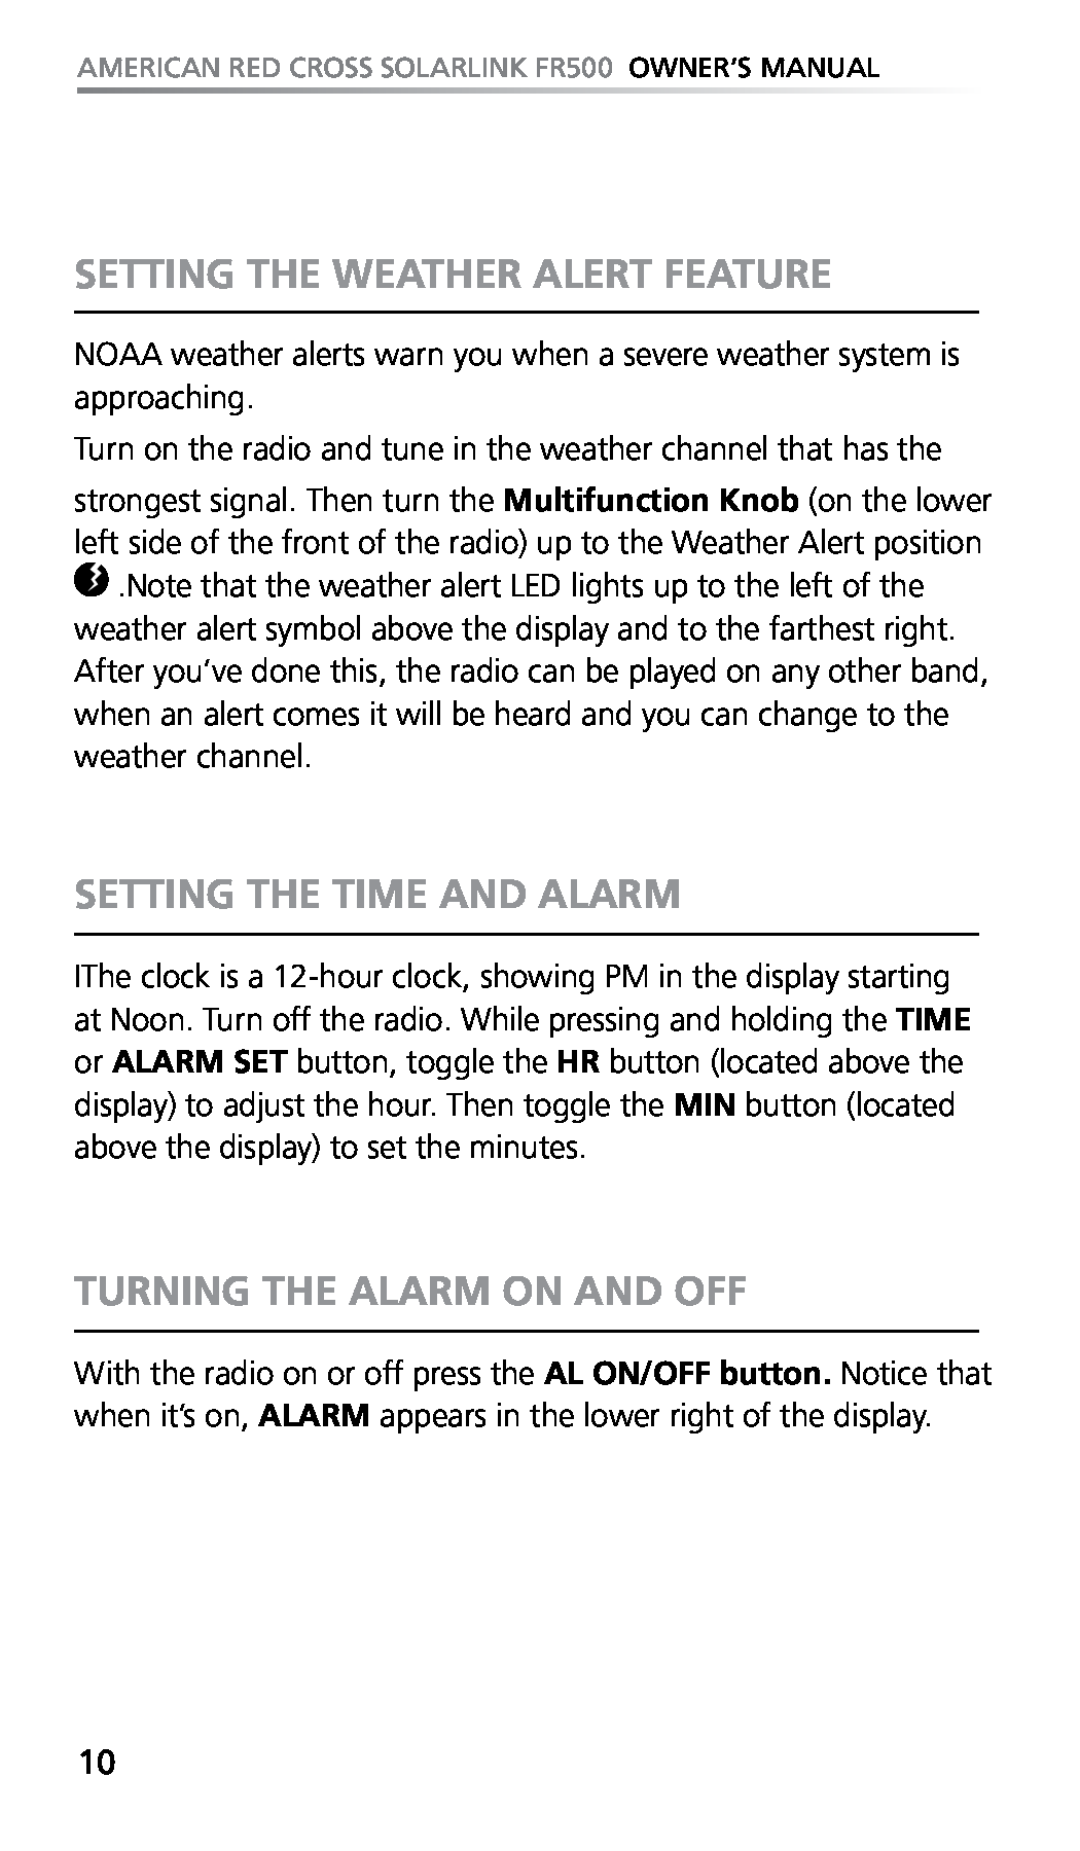 Eton FR500 owner manual Setting The Weather Alert Feature, Setting The Time And Alarm, Turning The Alarm On And Off 